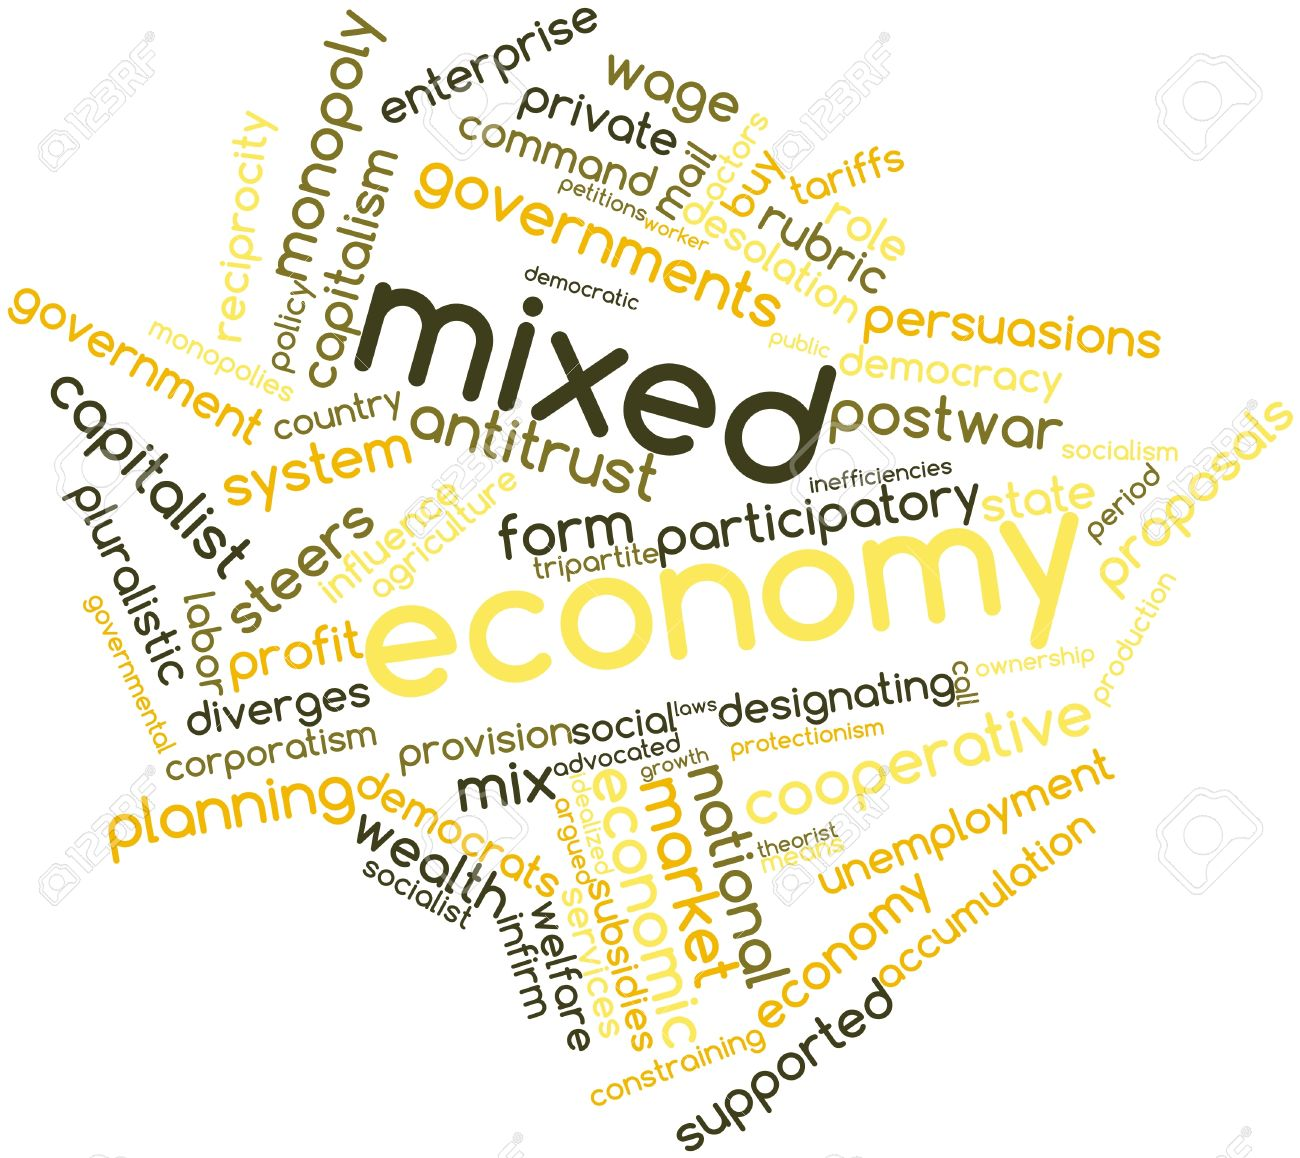 A mixed economy is variously 